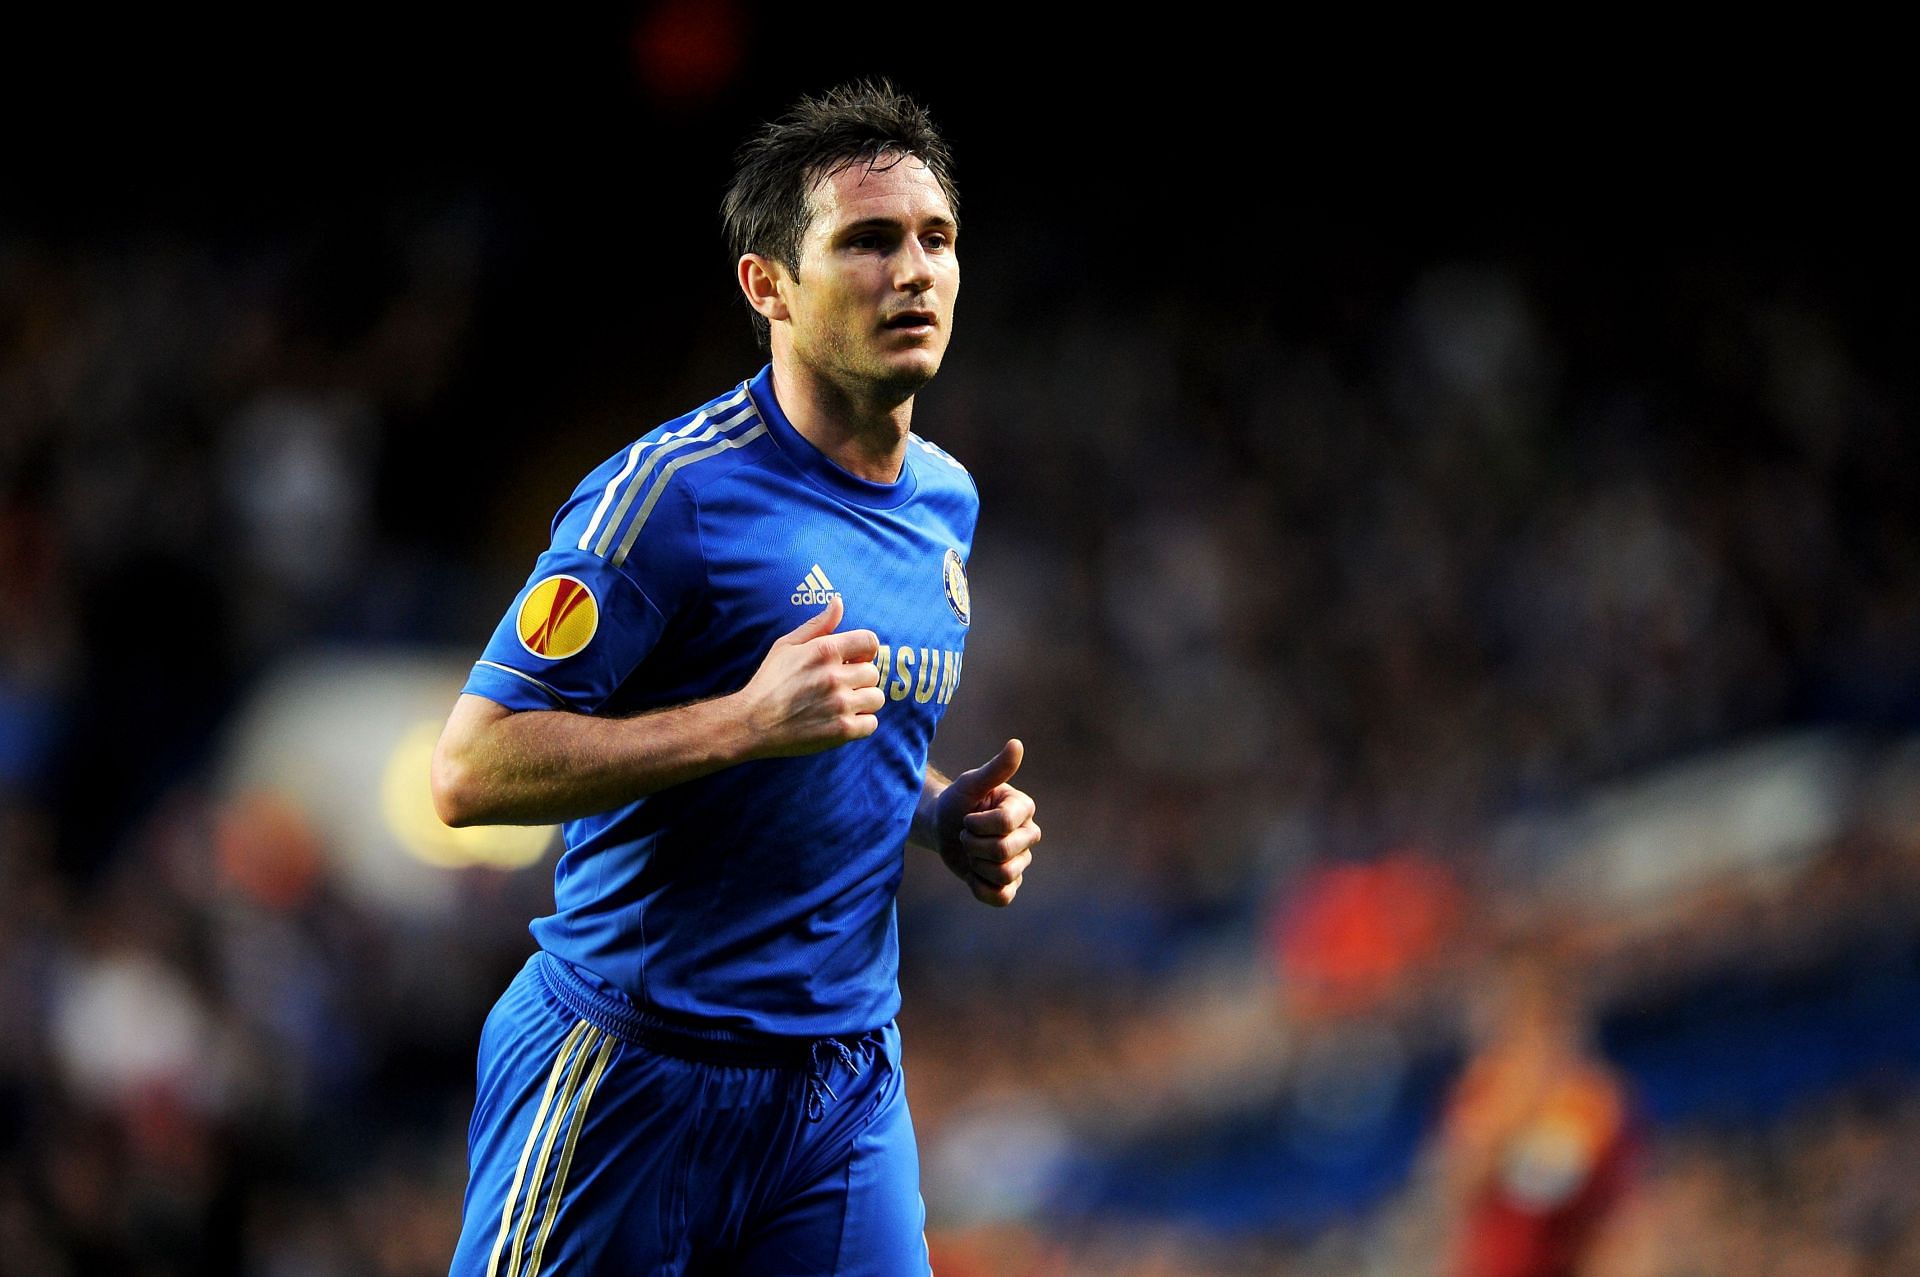 Frank Lampard in action during a Europa League game for Chelsea.